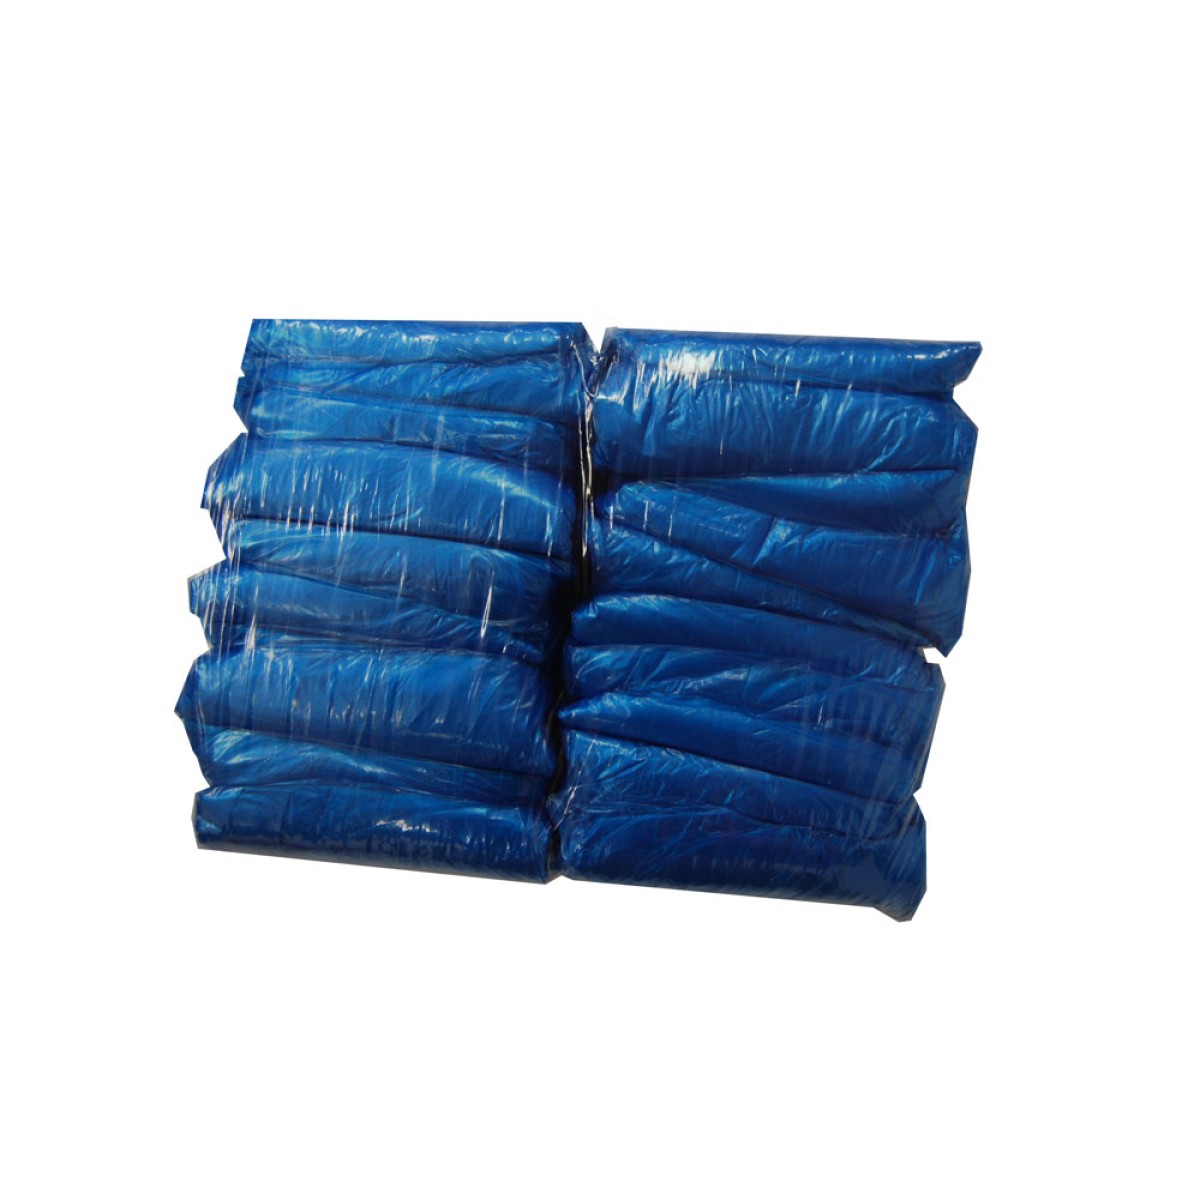 IKON DISPOSABLE PE SLEEVE COVER BLUE 100